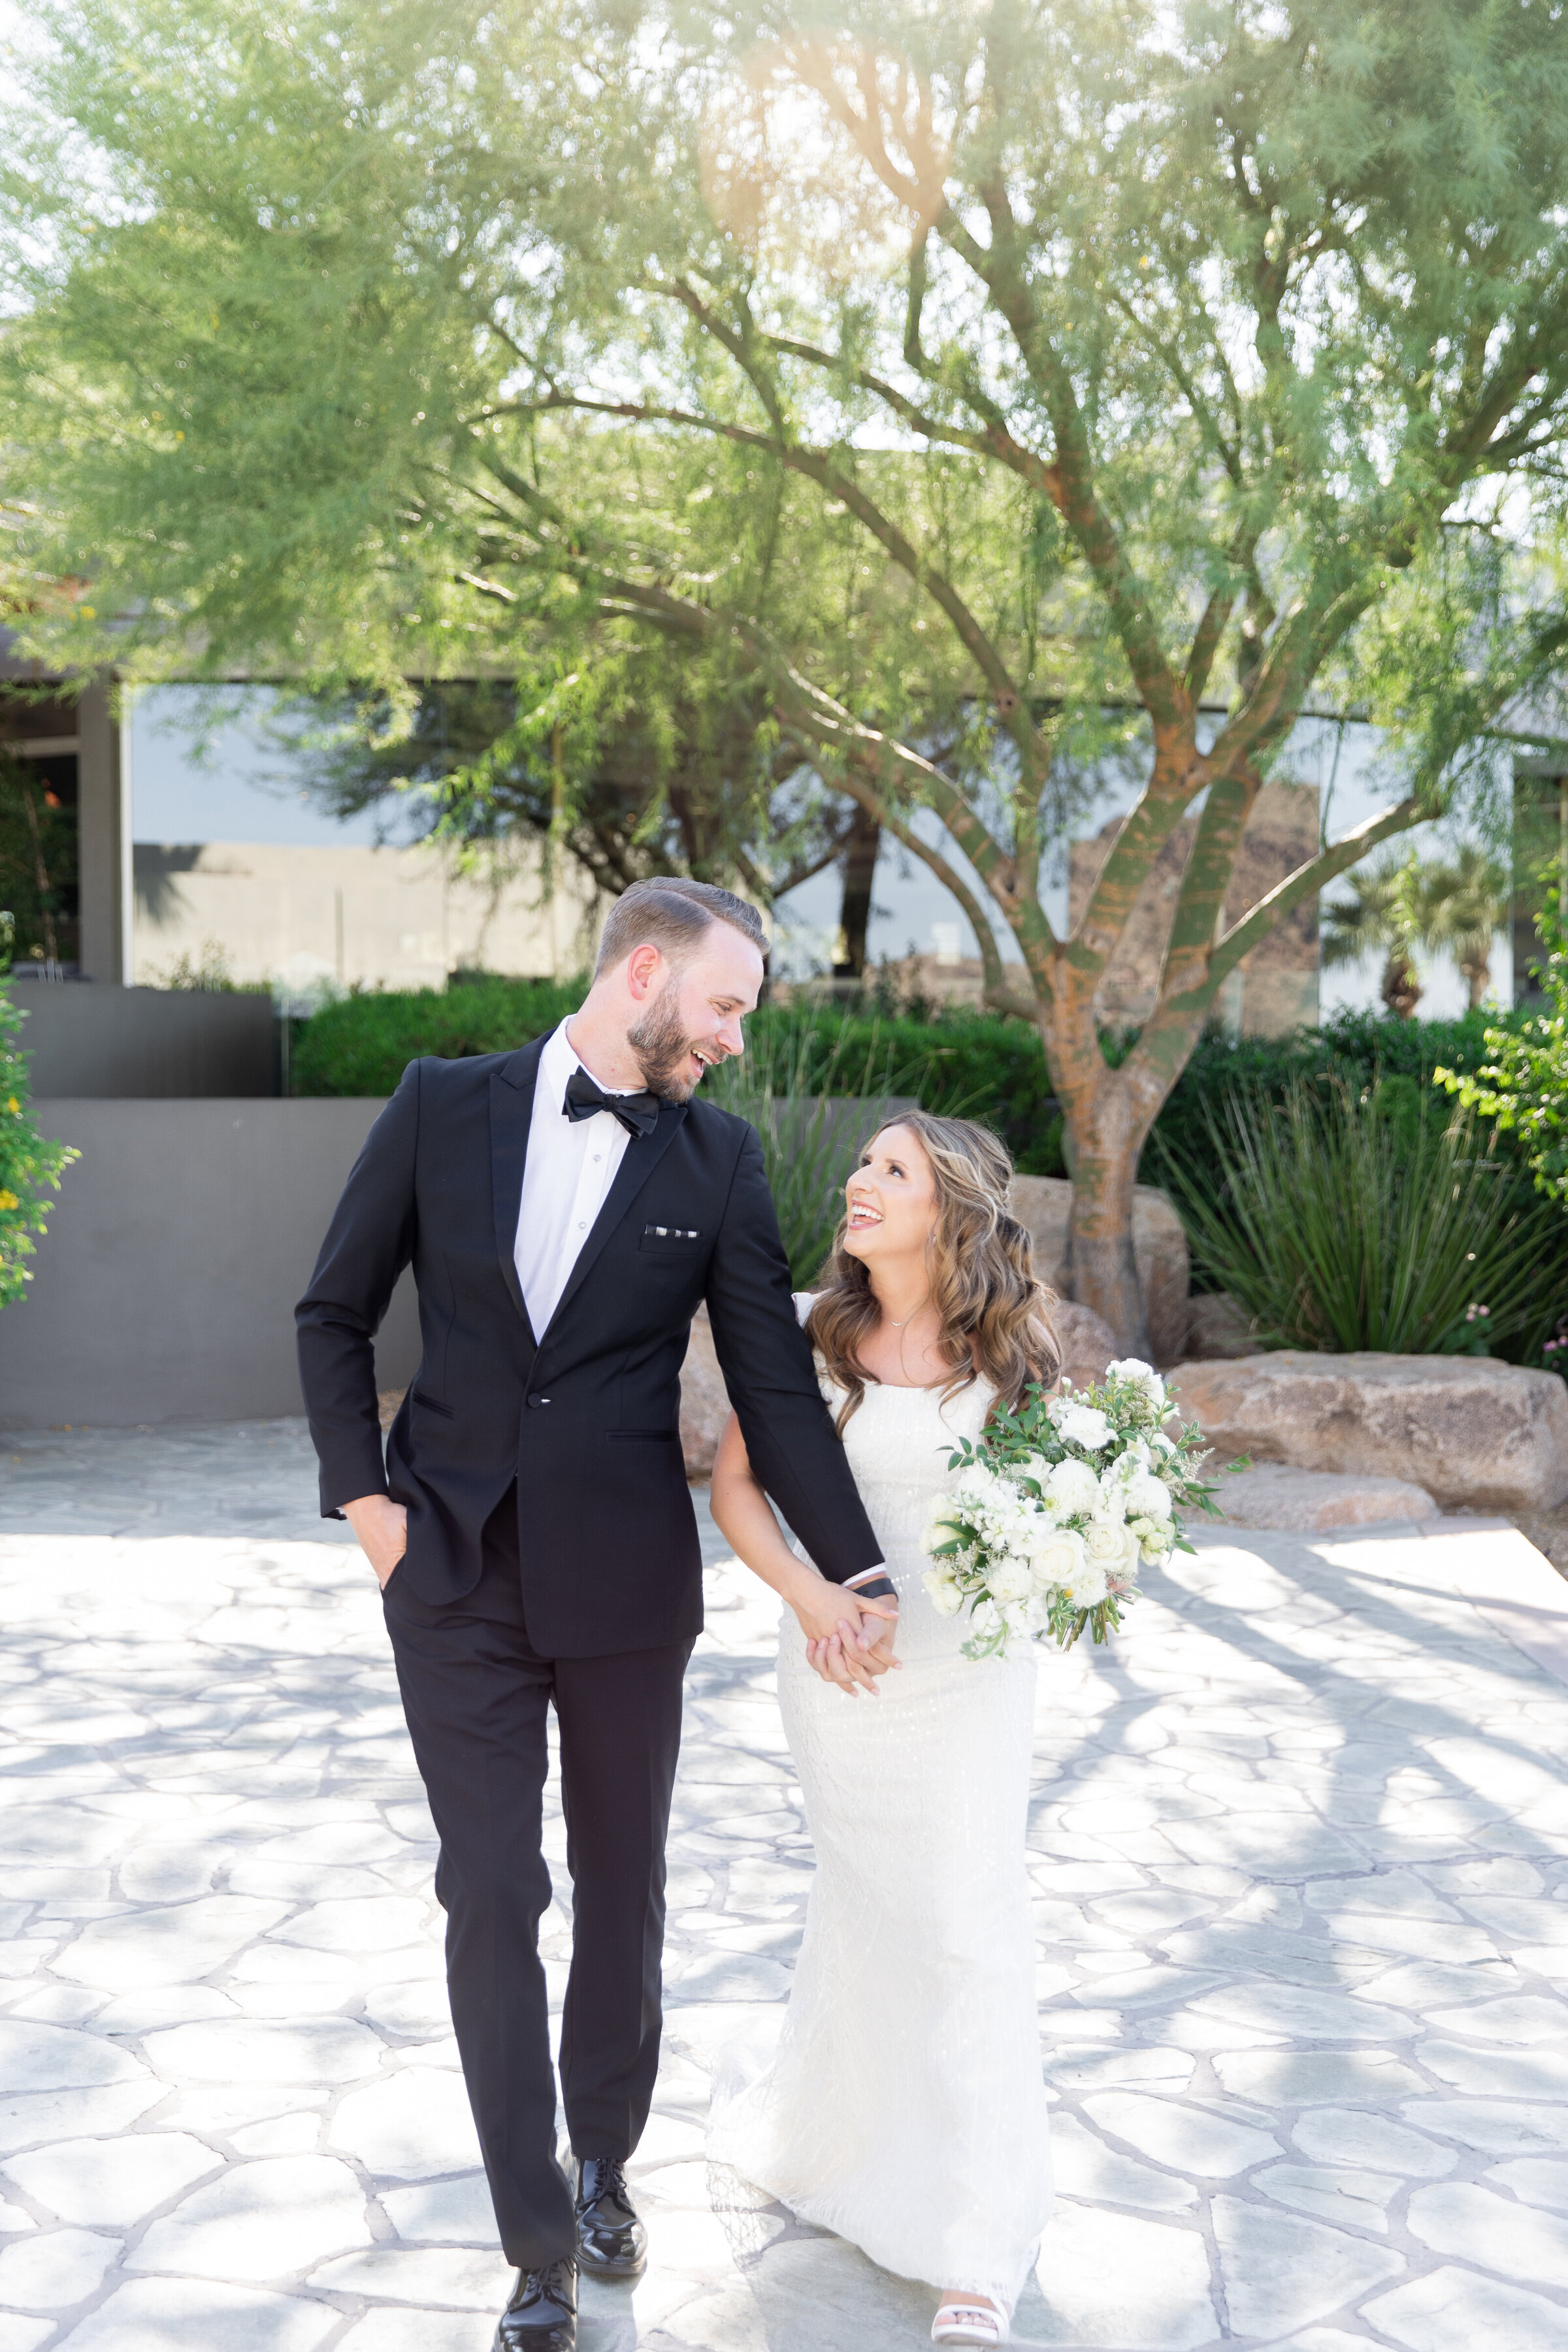 Karlie Colleen Photography - Josh & Jessica - Sanctuary Camelback Mountain Resort - Paradise Valley Arizona - Outstanding Occasions-77